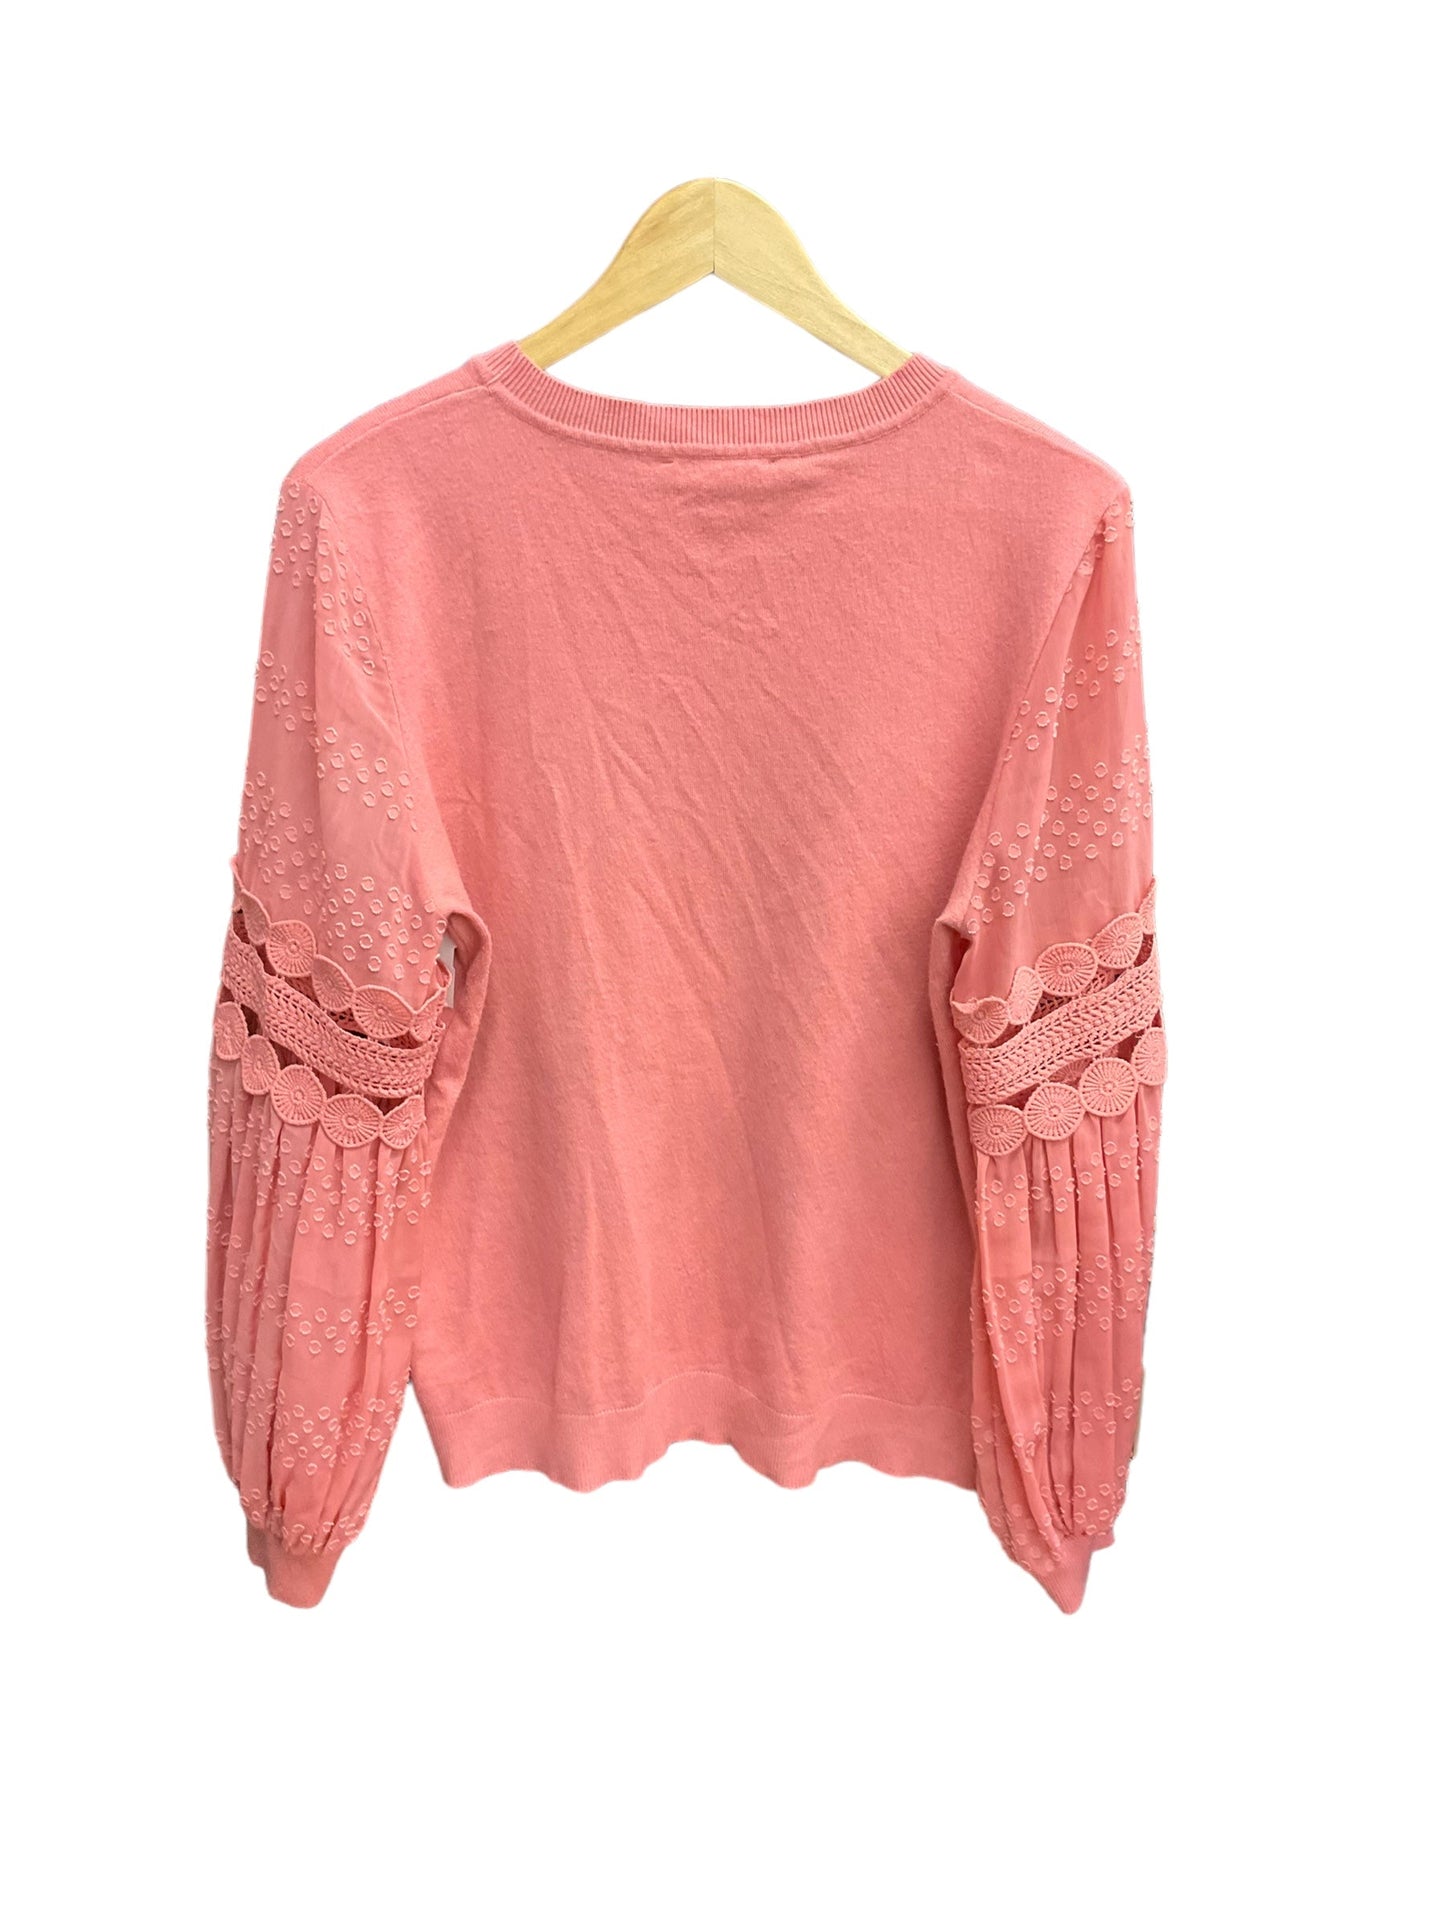 Pink Top Long Sleeve Sioni, Size Xl